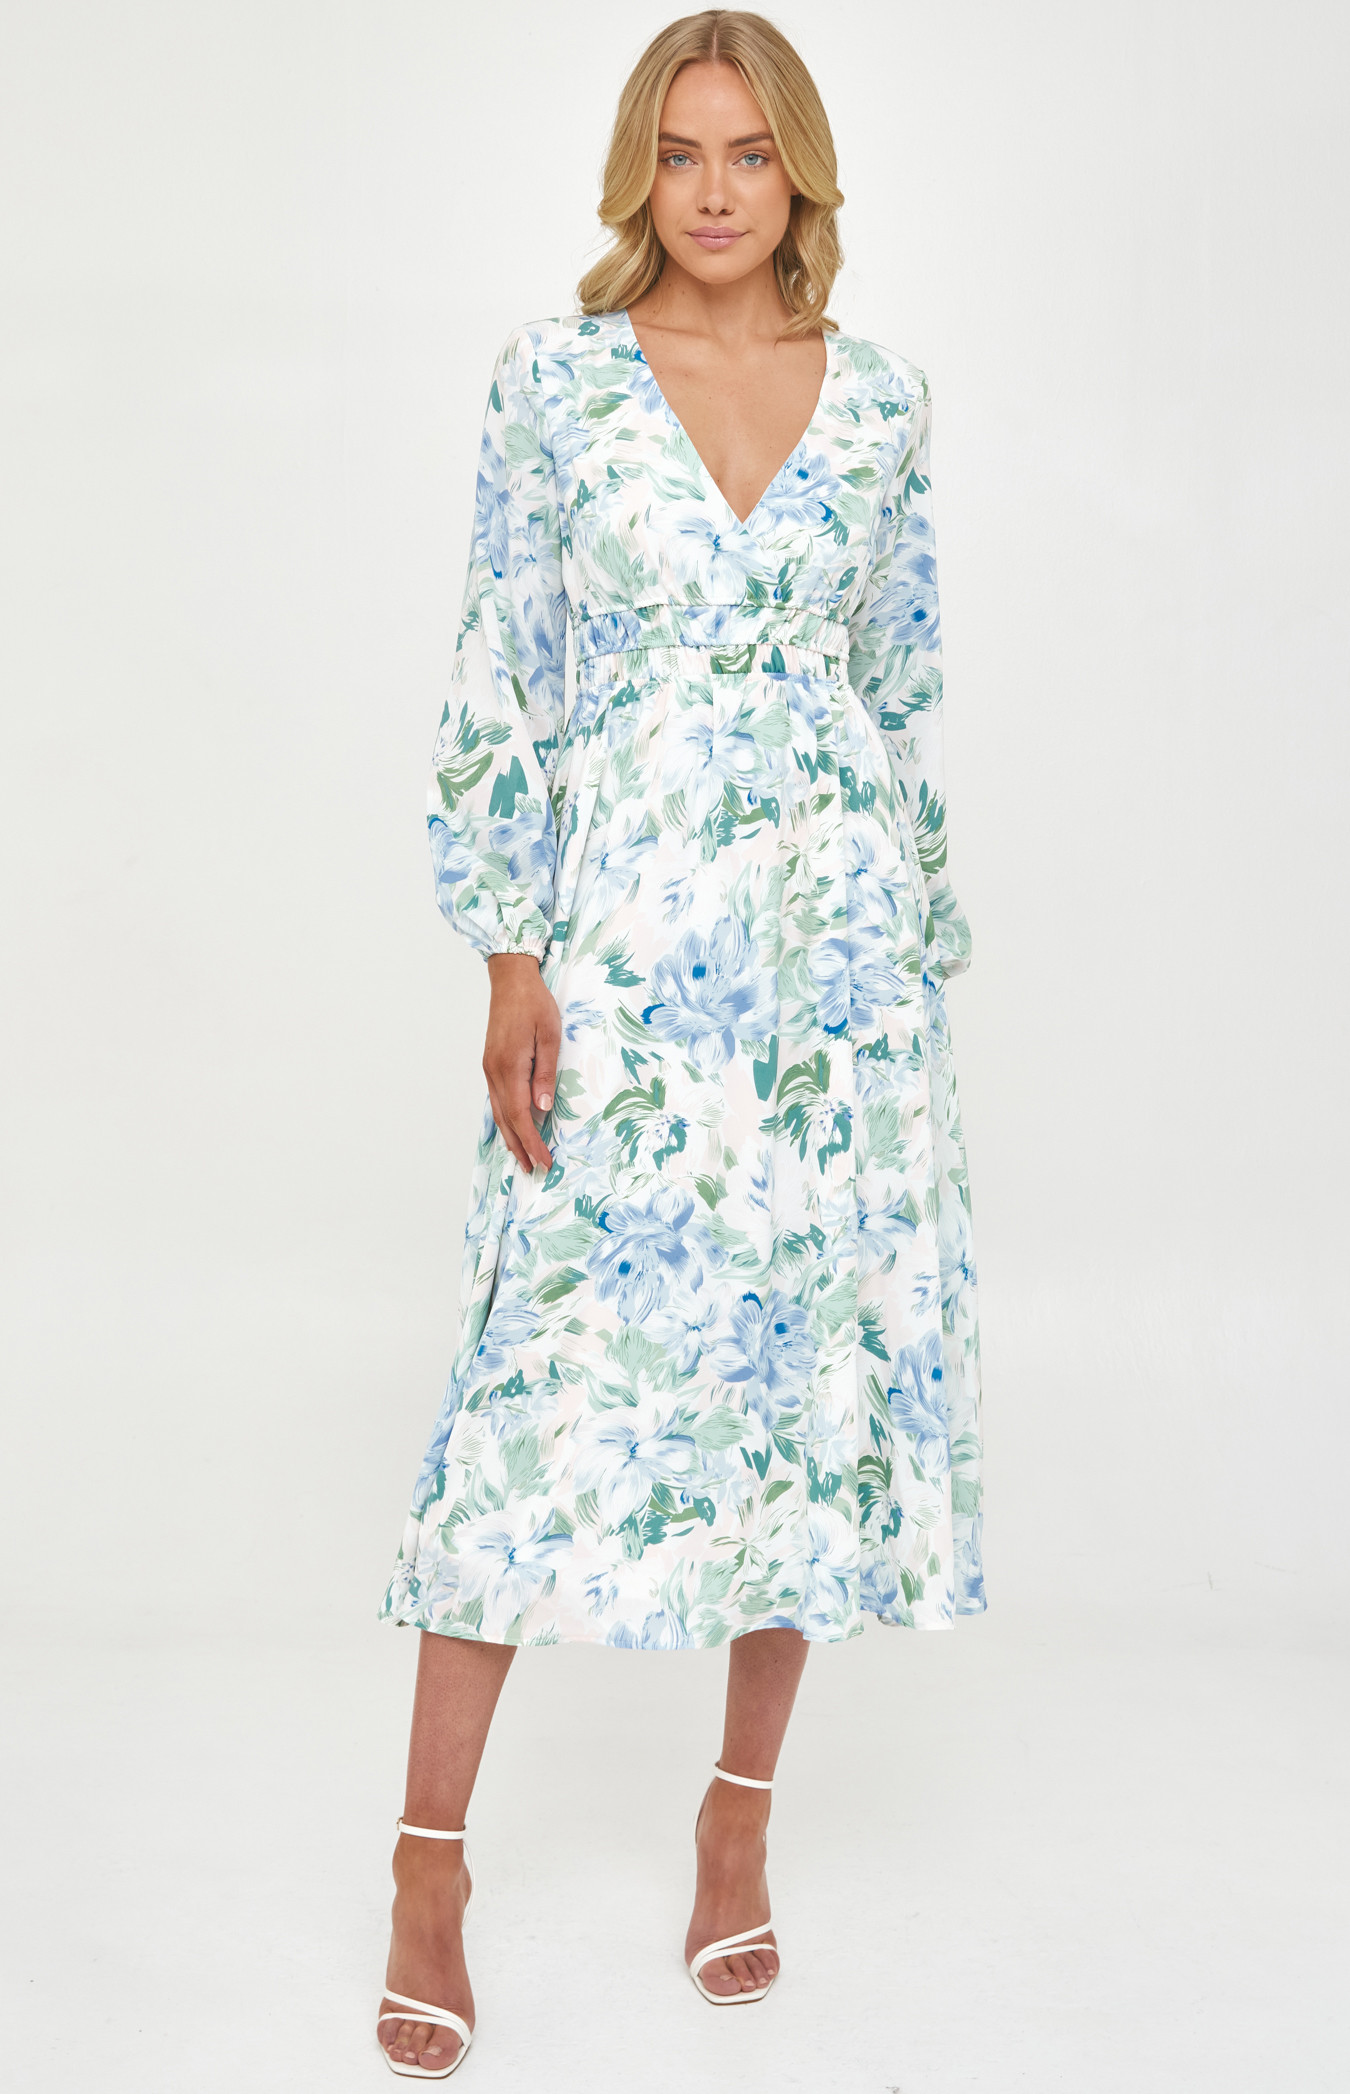 Printed Floral Maxi with Elastic Waist Details (SDR1221B) 